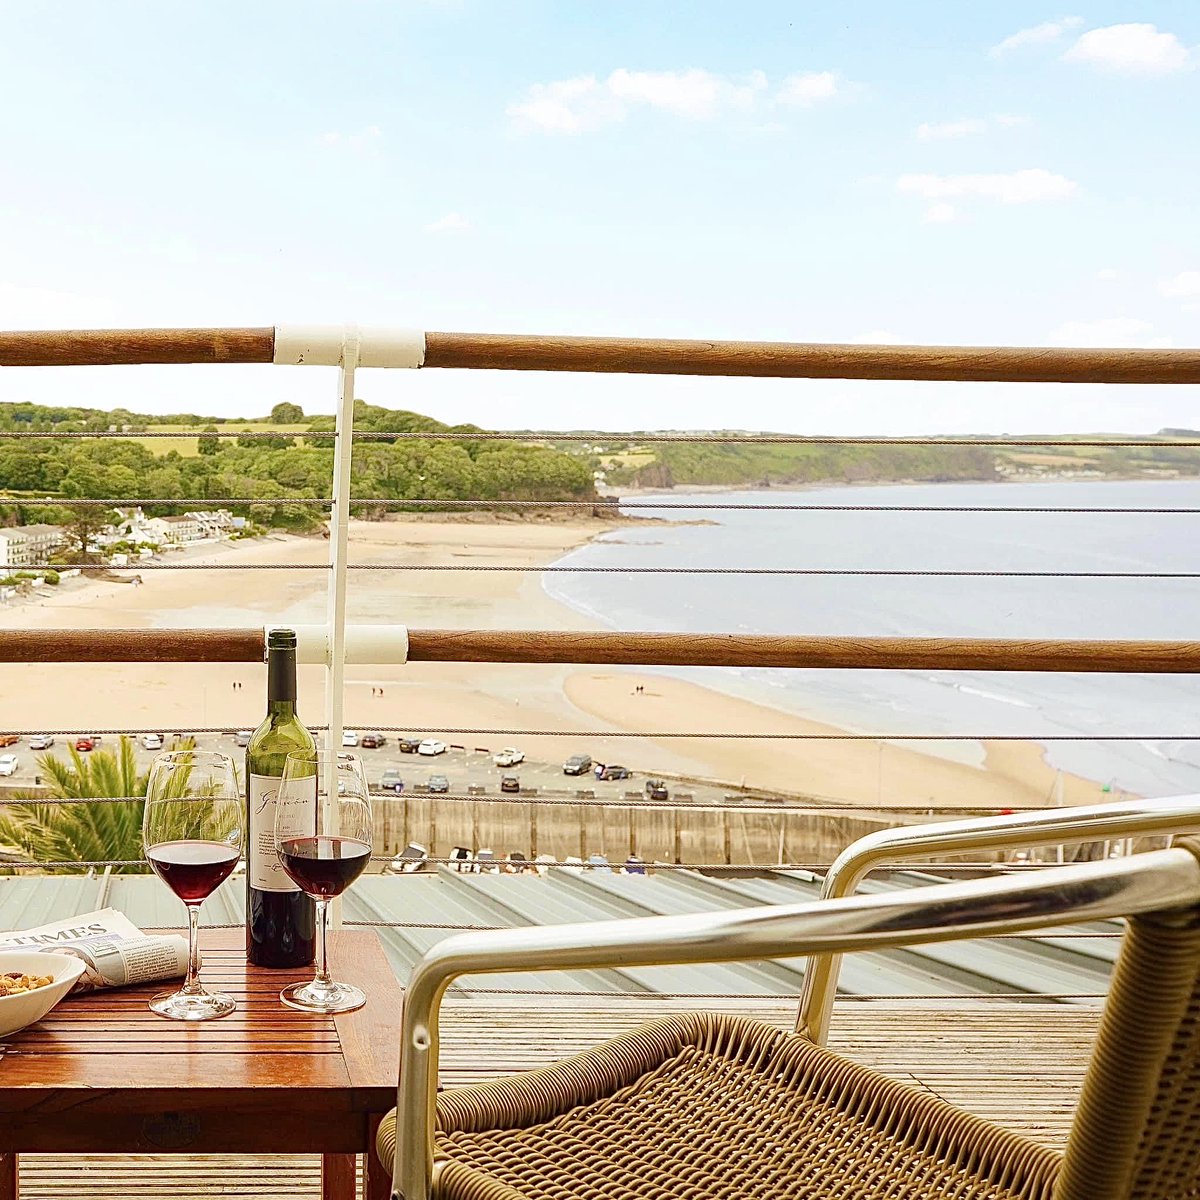 Sneak away on Sundays this Spring with our ‘Sunday Sea View!’ Extend your weekend with our special offer which includes Cooked Breakfast, Use of the Spa Facilities and a complimentary upgrade to the Best Available Sea View Room for only £270 per night. stbridesspahotel.com/offers